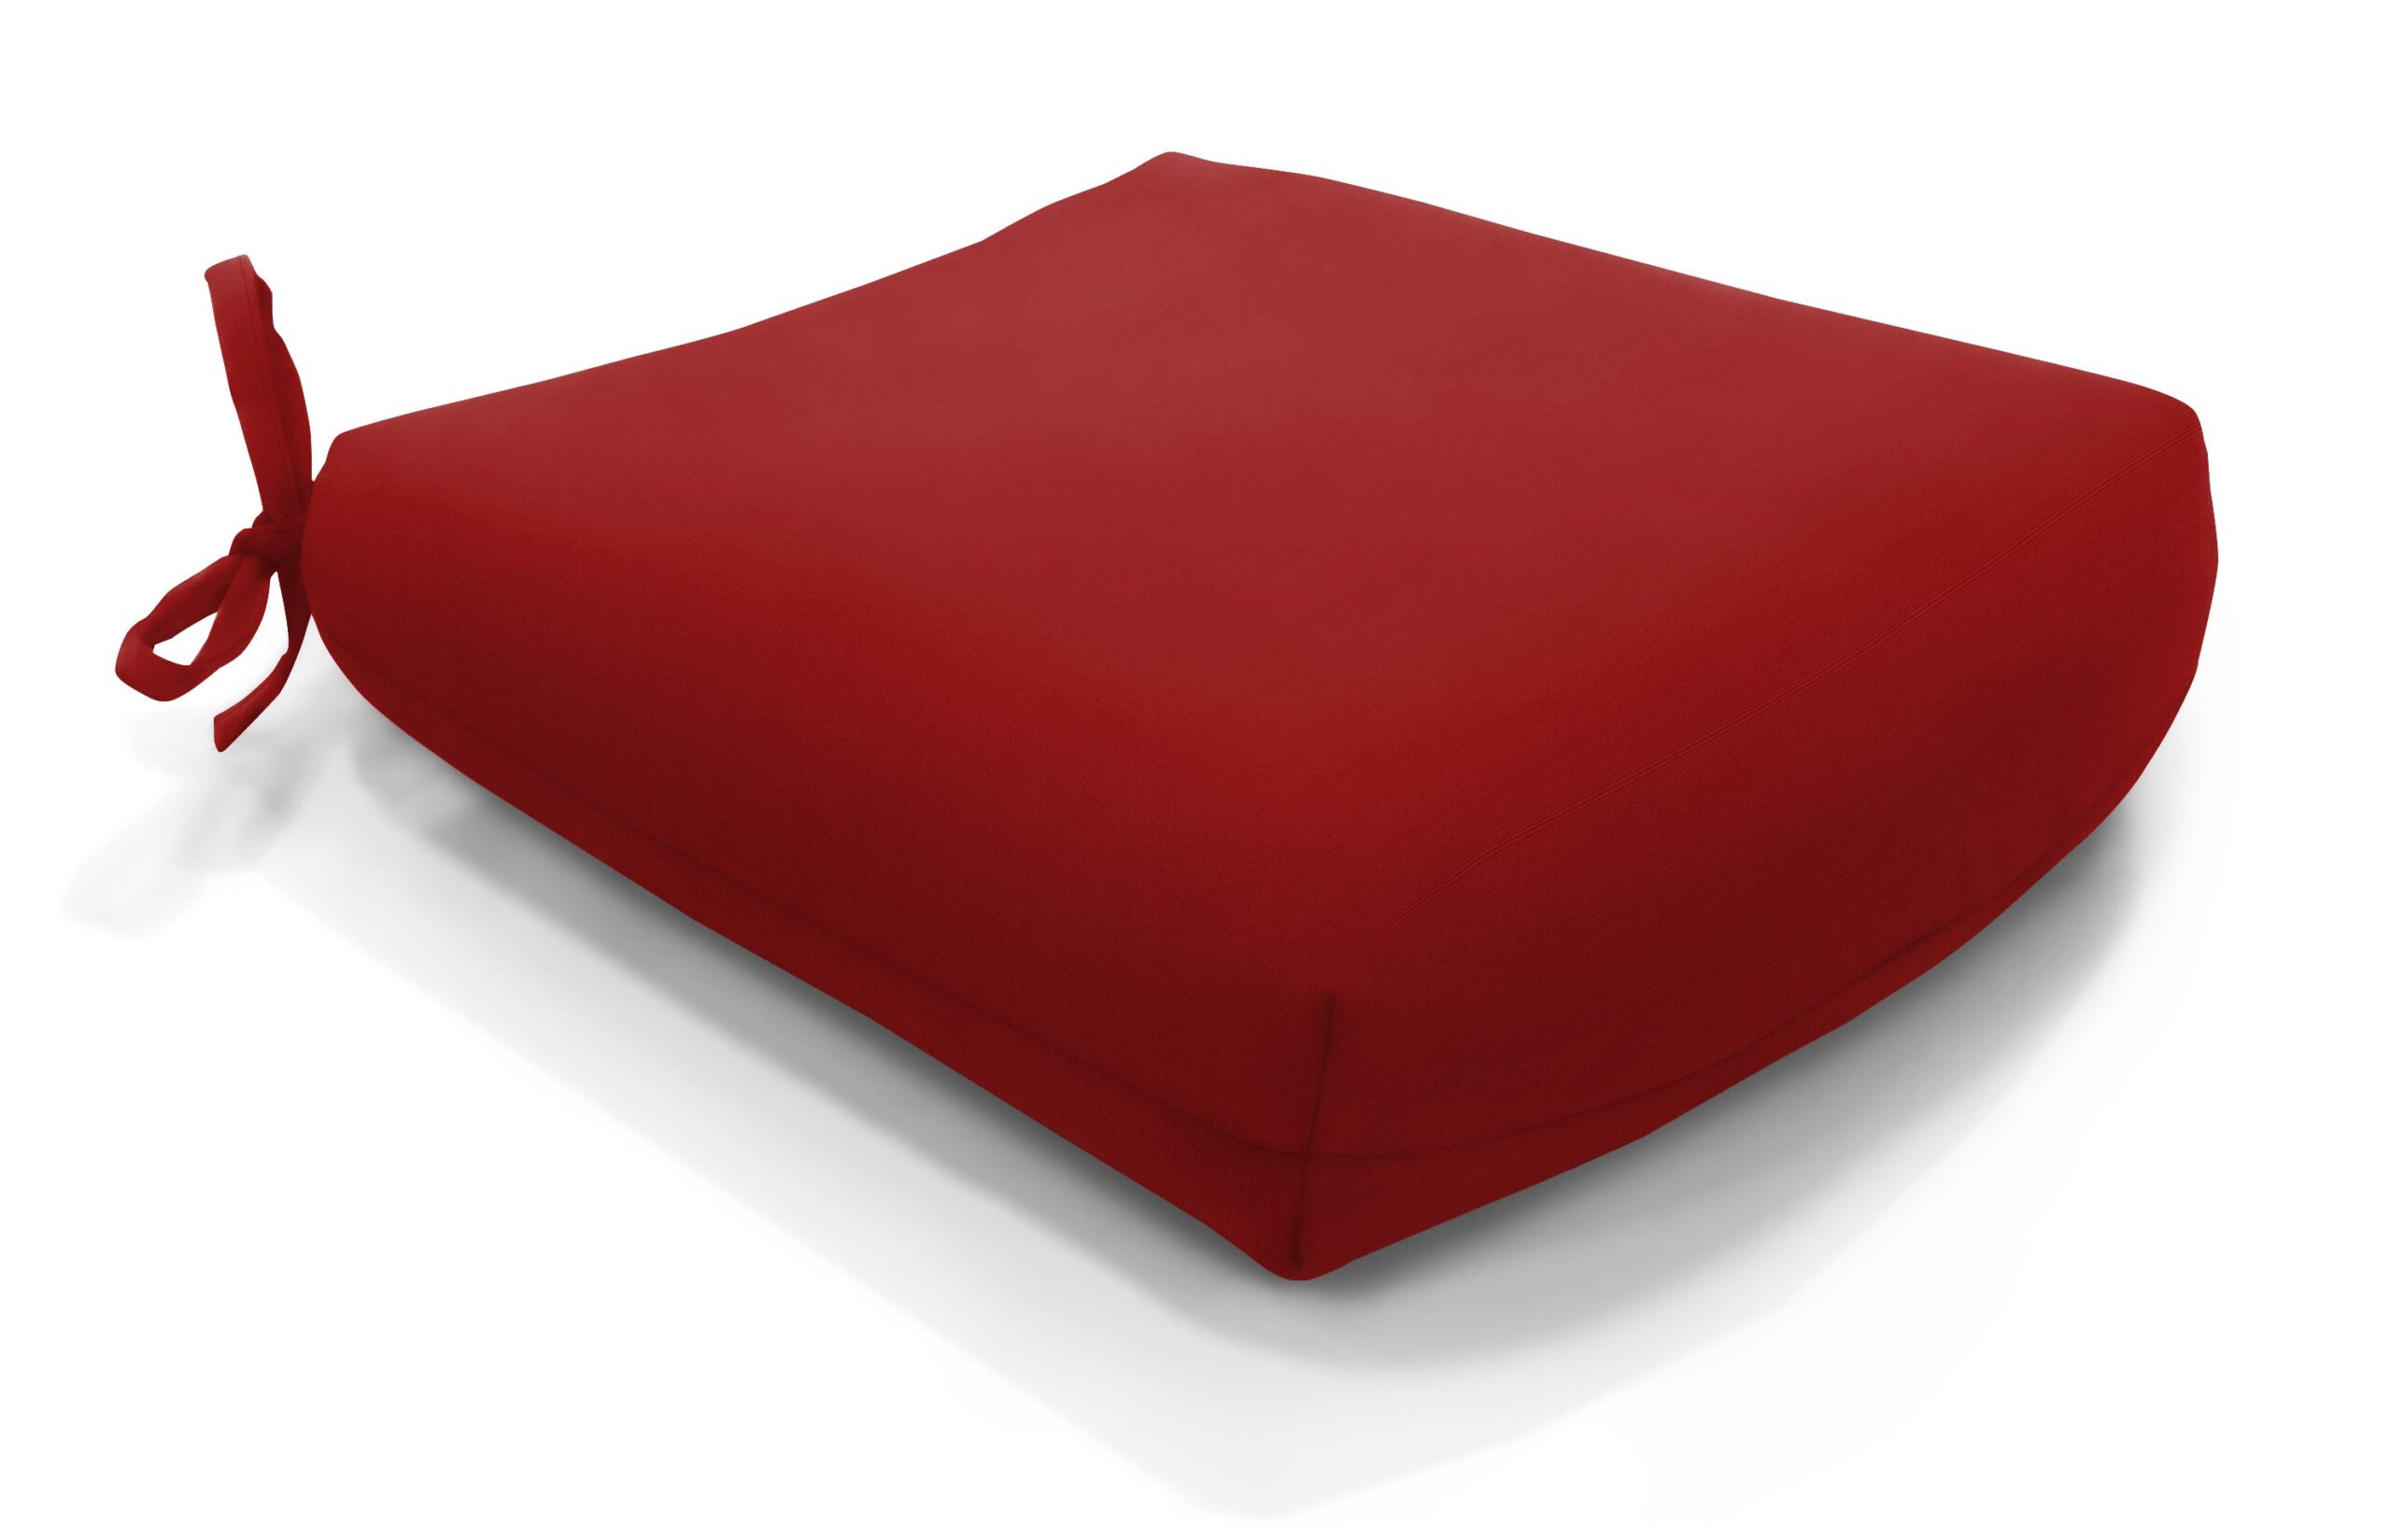 18/16.5 X 17.5 Tapered Seat Pad Canvas Jockey Red Clearance